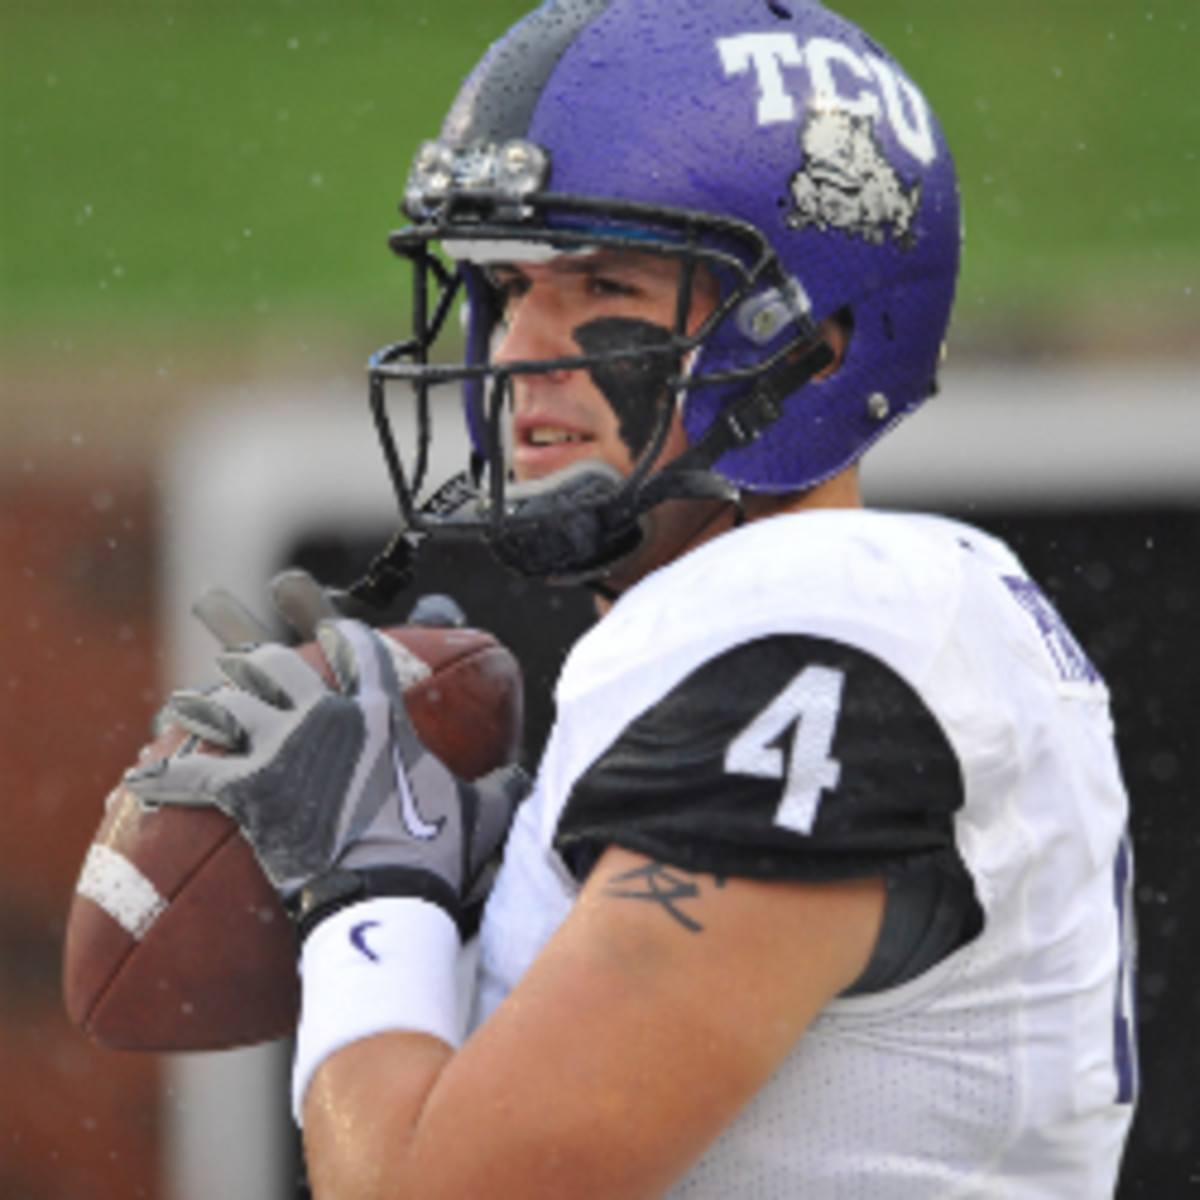 TCU quarterback Casey Pachall has returned to campus and the football team after undergoing treatment for substance abuse. (Cooper Neill/Getty Images)